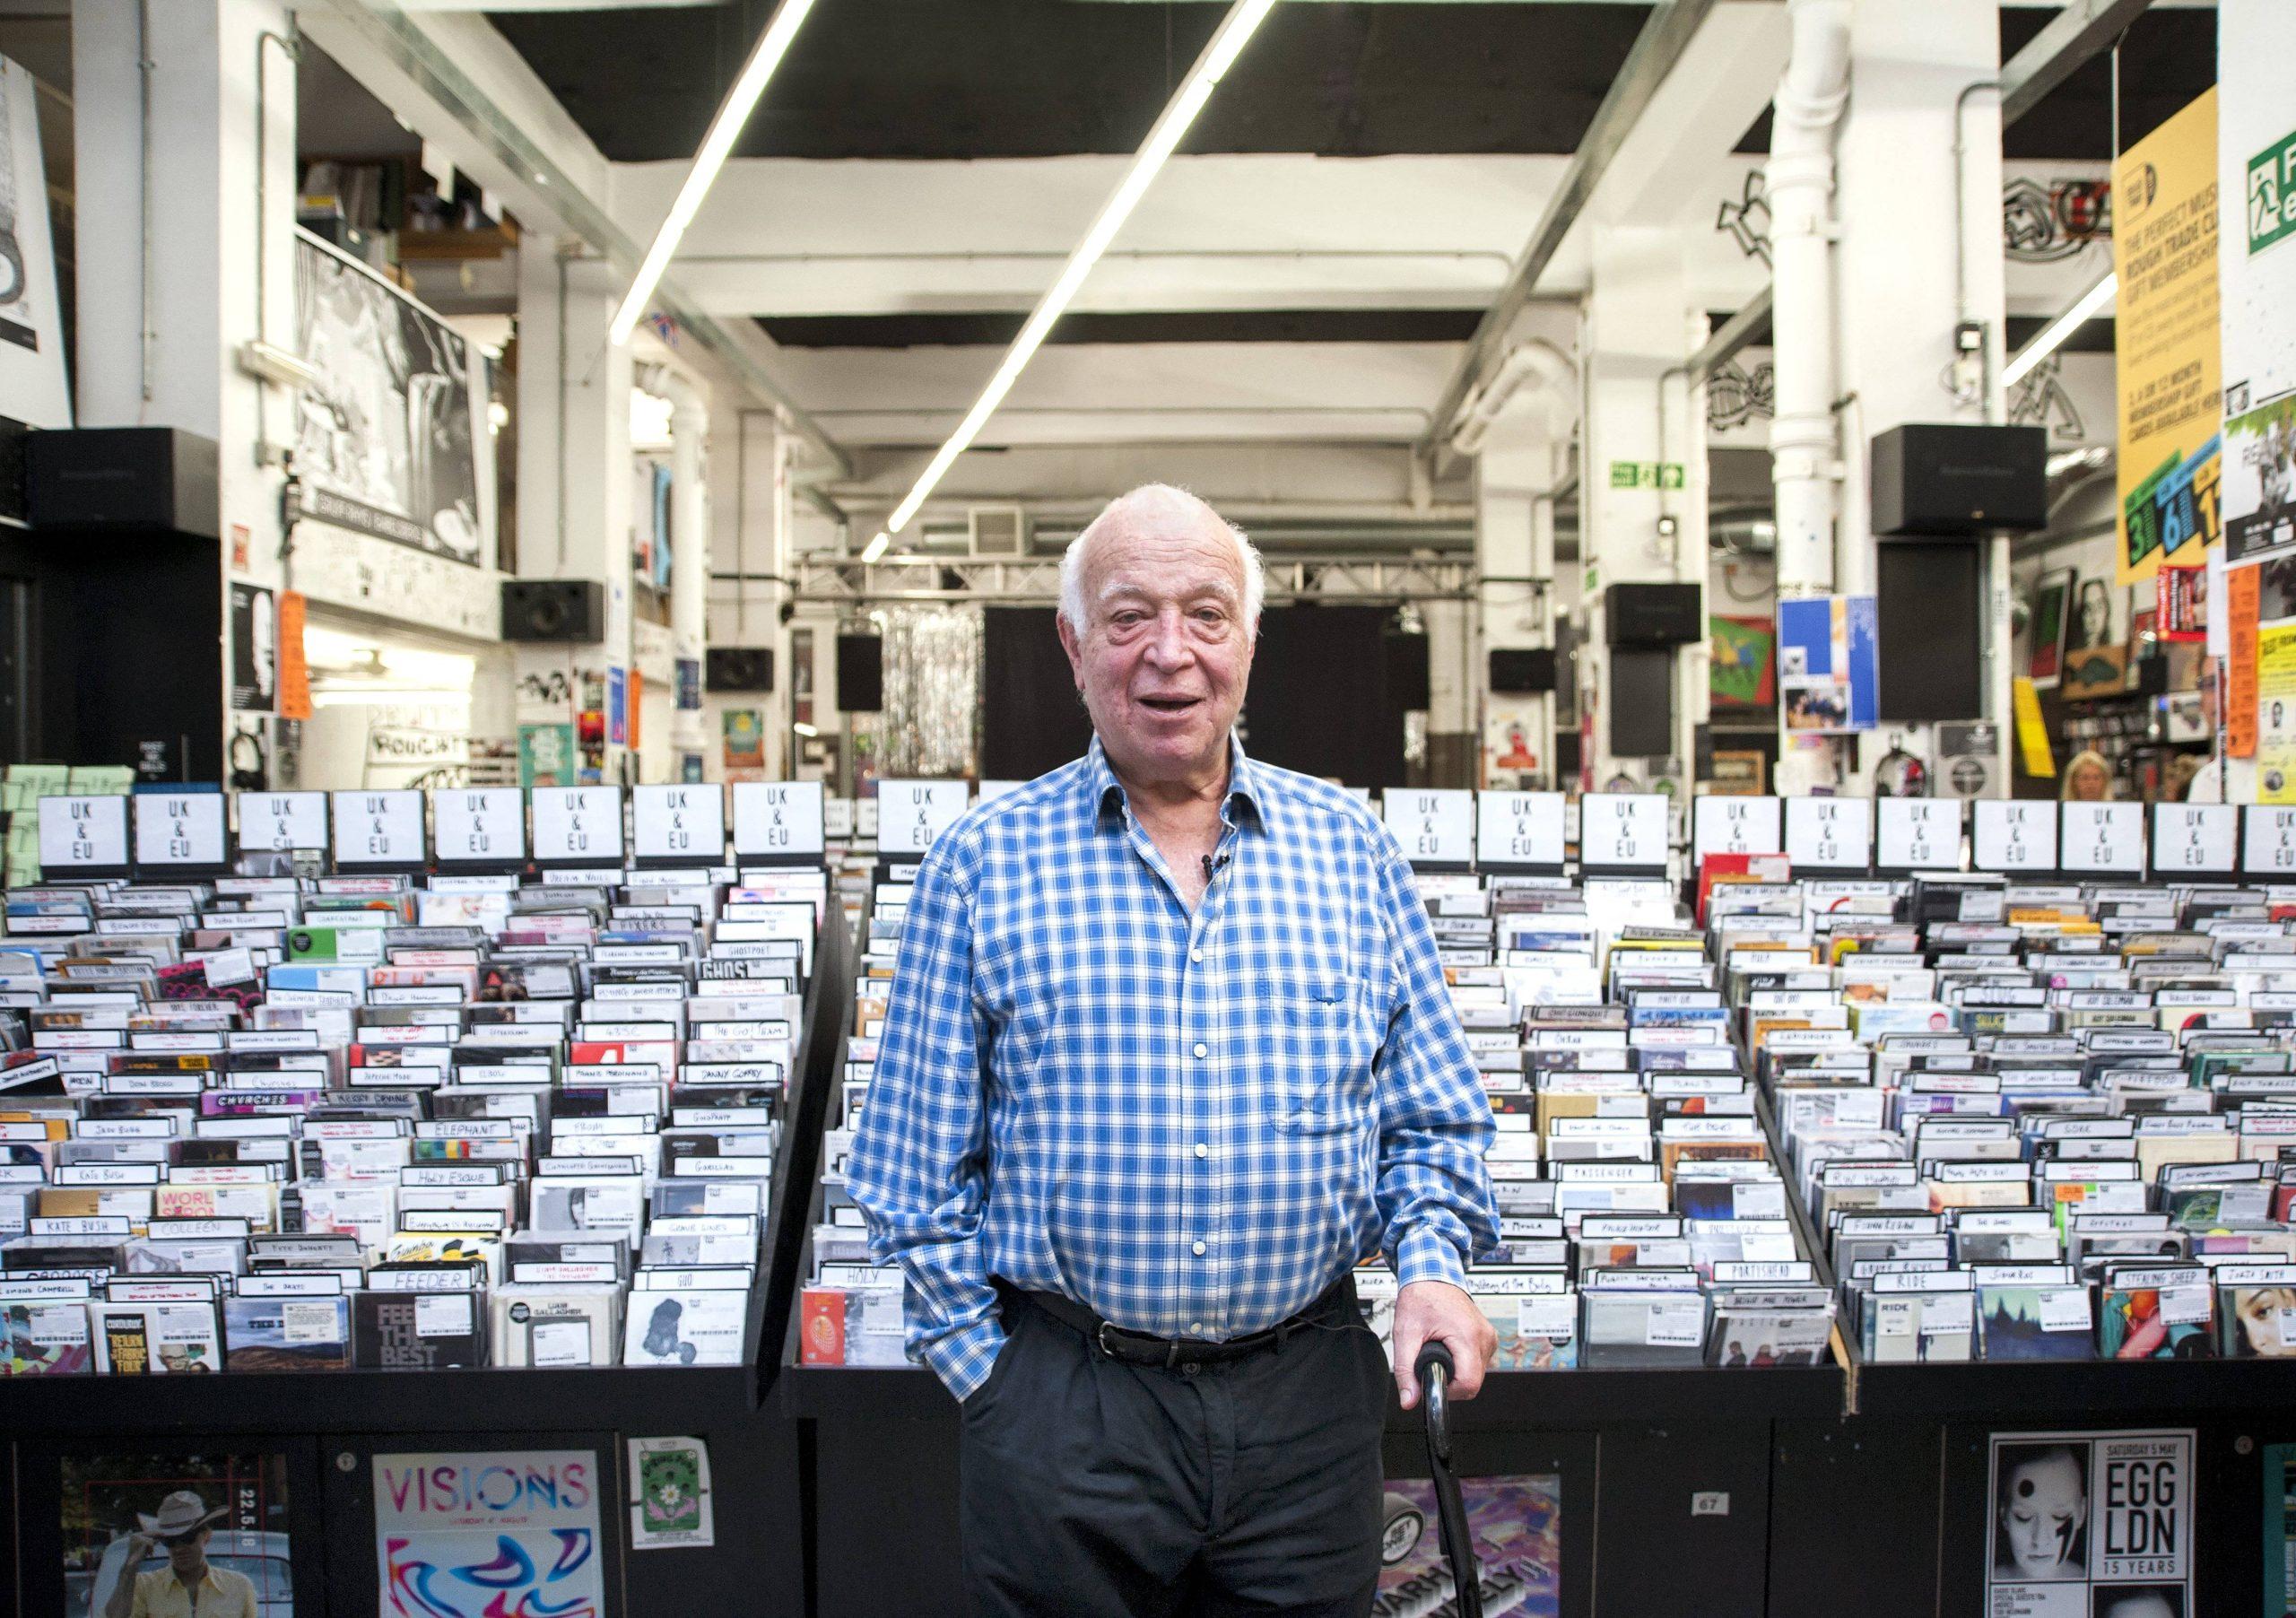 Seymour Stein photographed at Rough Trade record shop